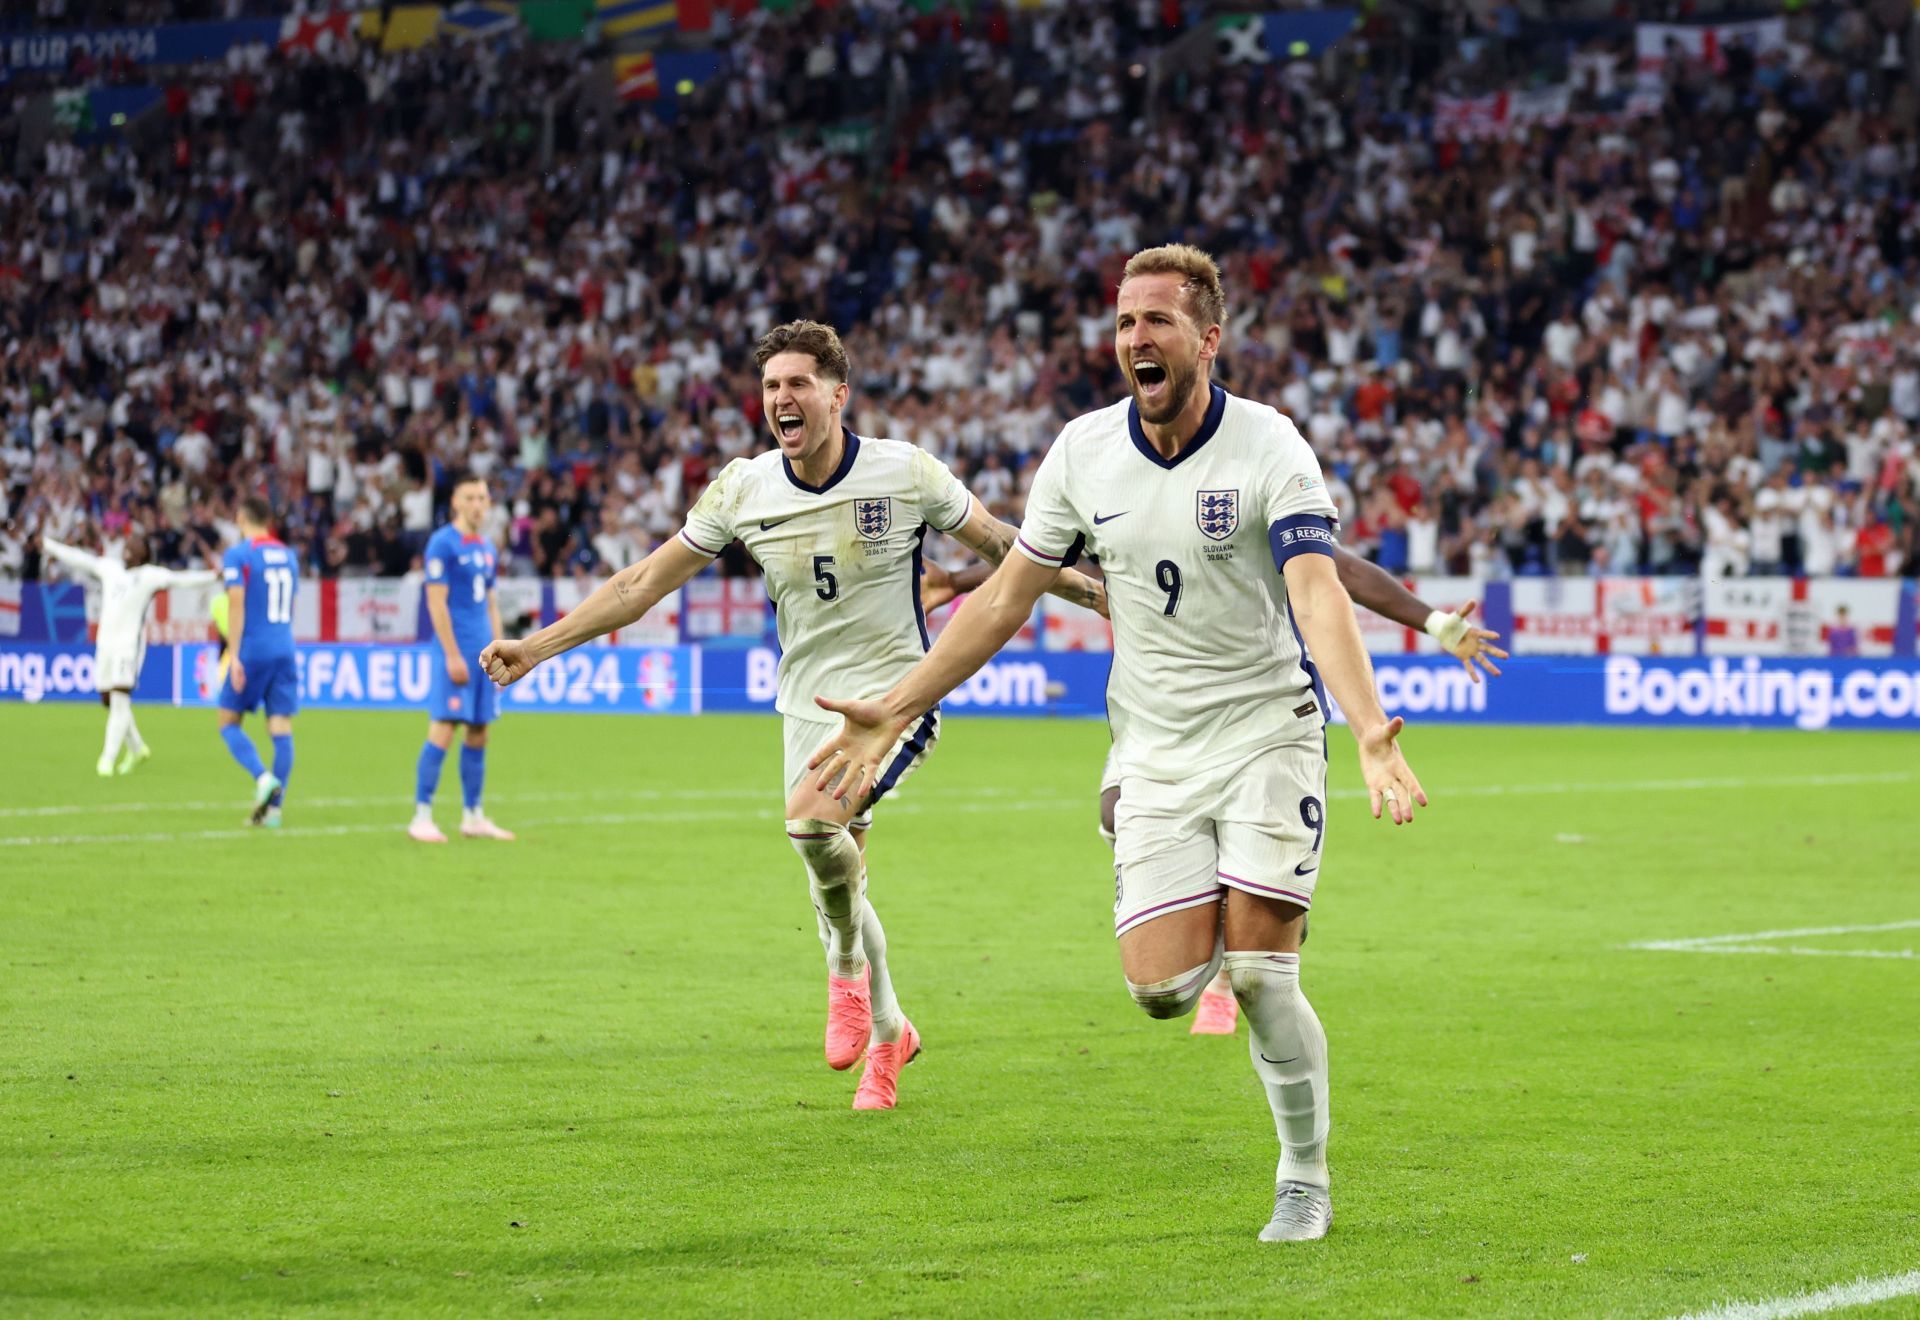 The pair got on the scoresheet to hand England the win.